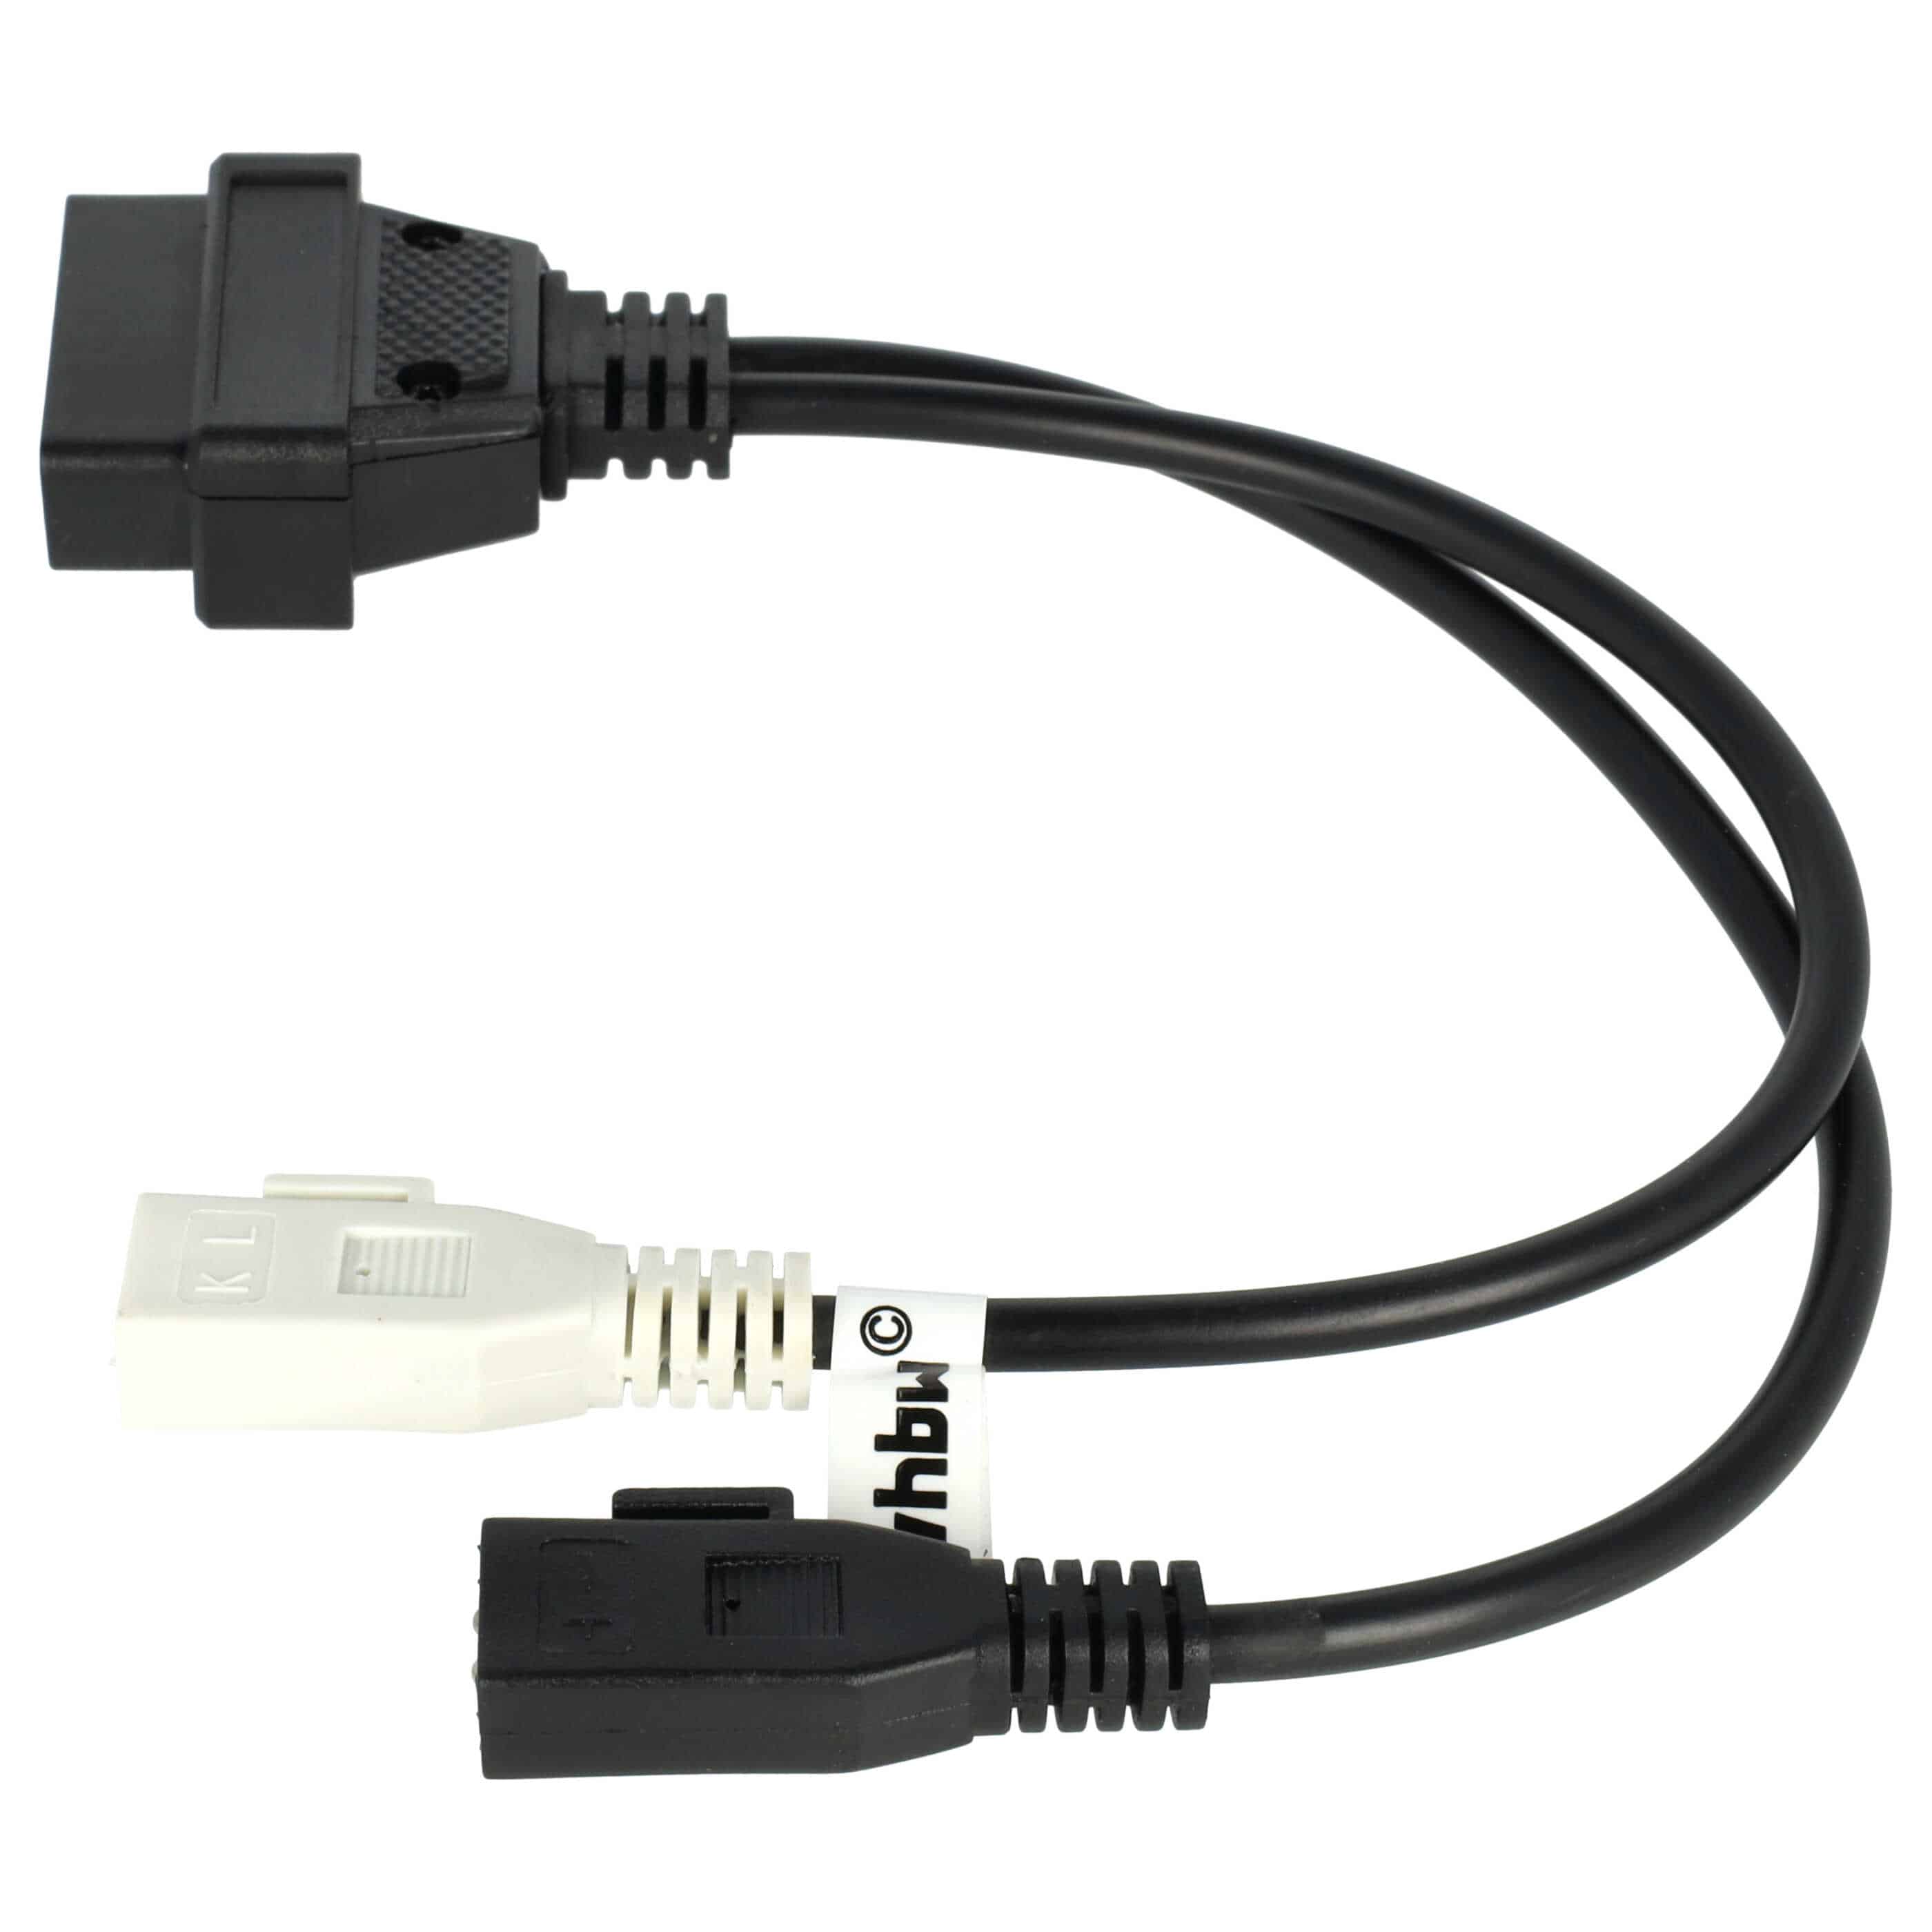 vhbw OBD2 Adapter 4Pin OBD1 to OBD2 suitable for 100 C4 Audi Vehicle - 30 cm